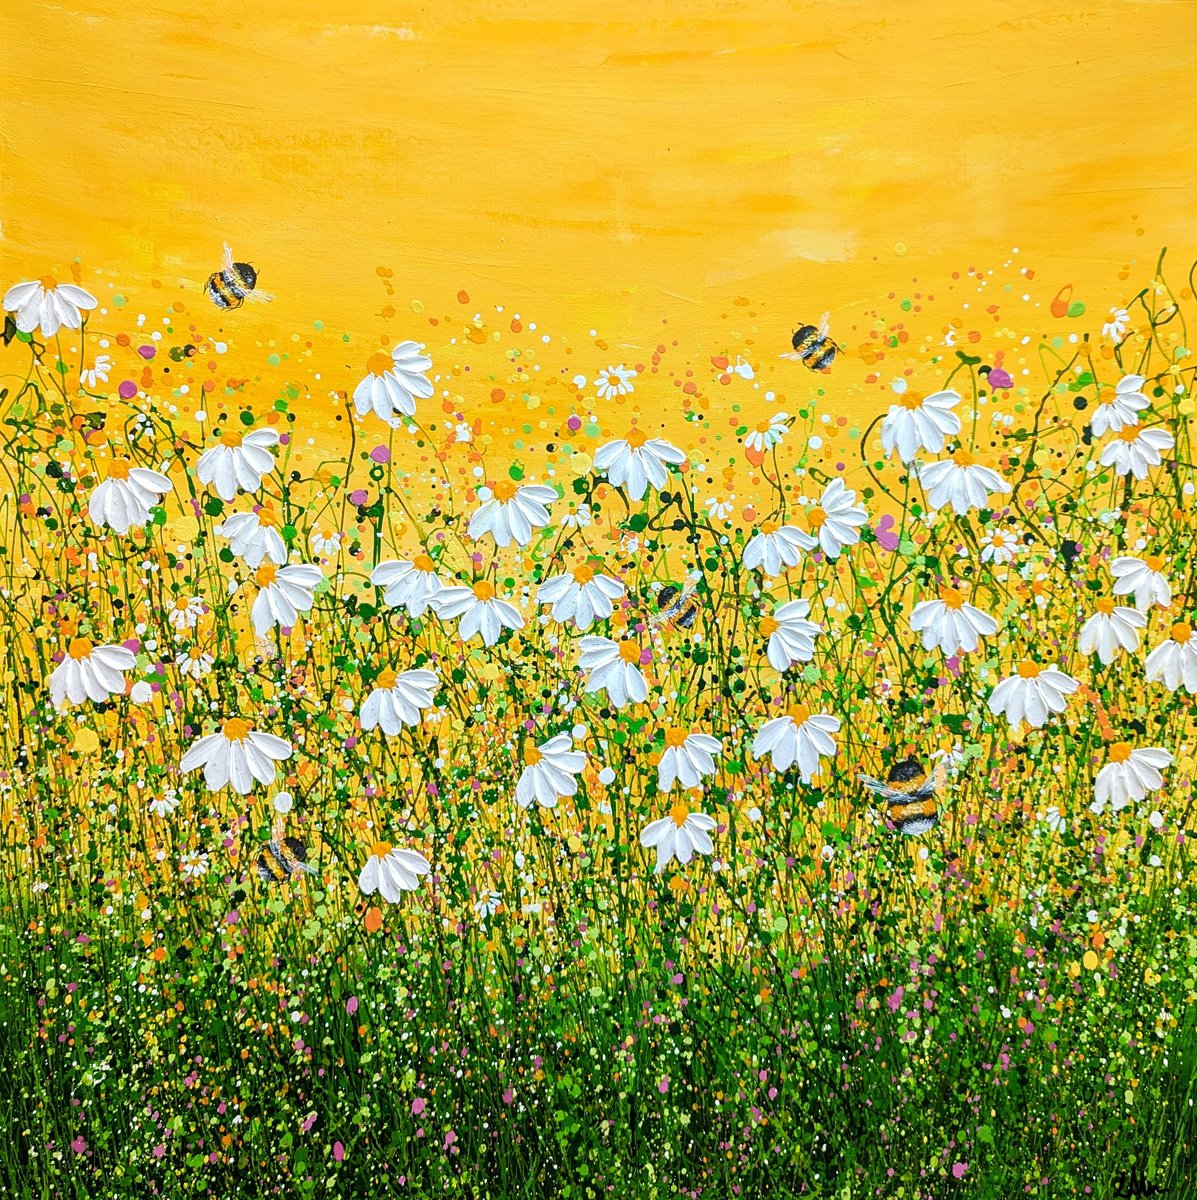 Bee utiful Sunny Delight #4 by Lucy Moore